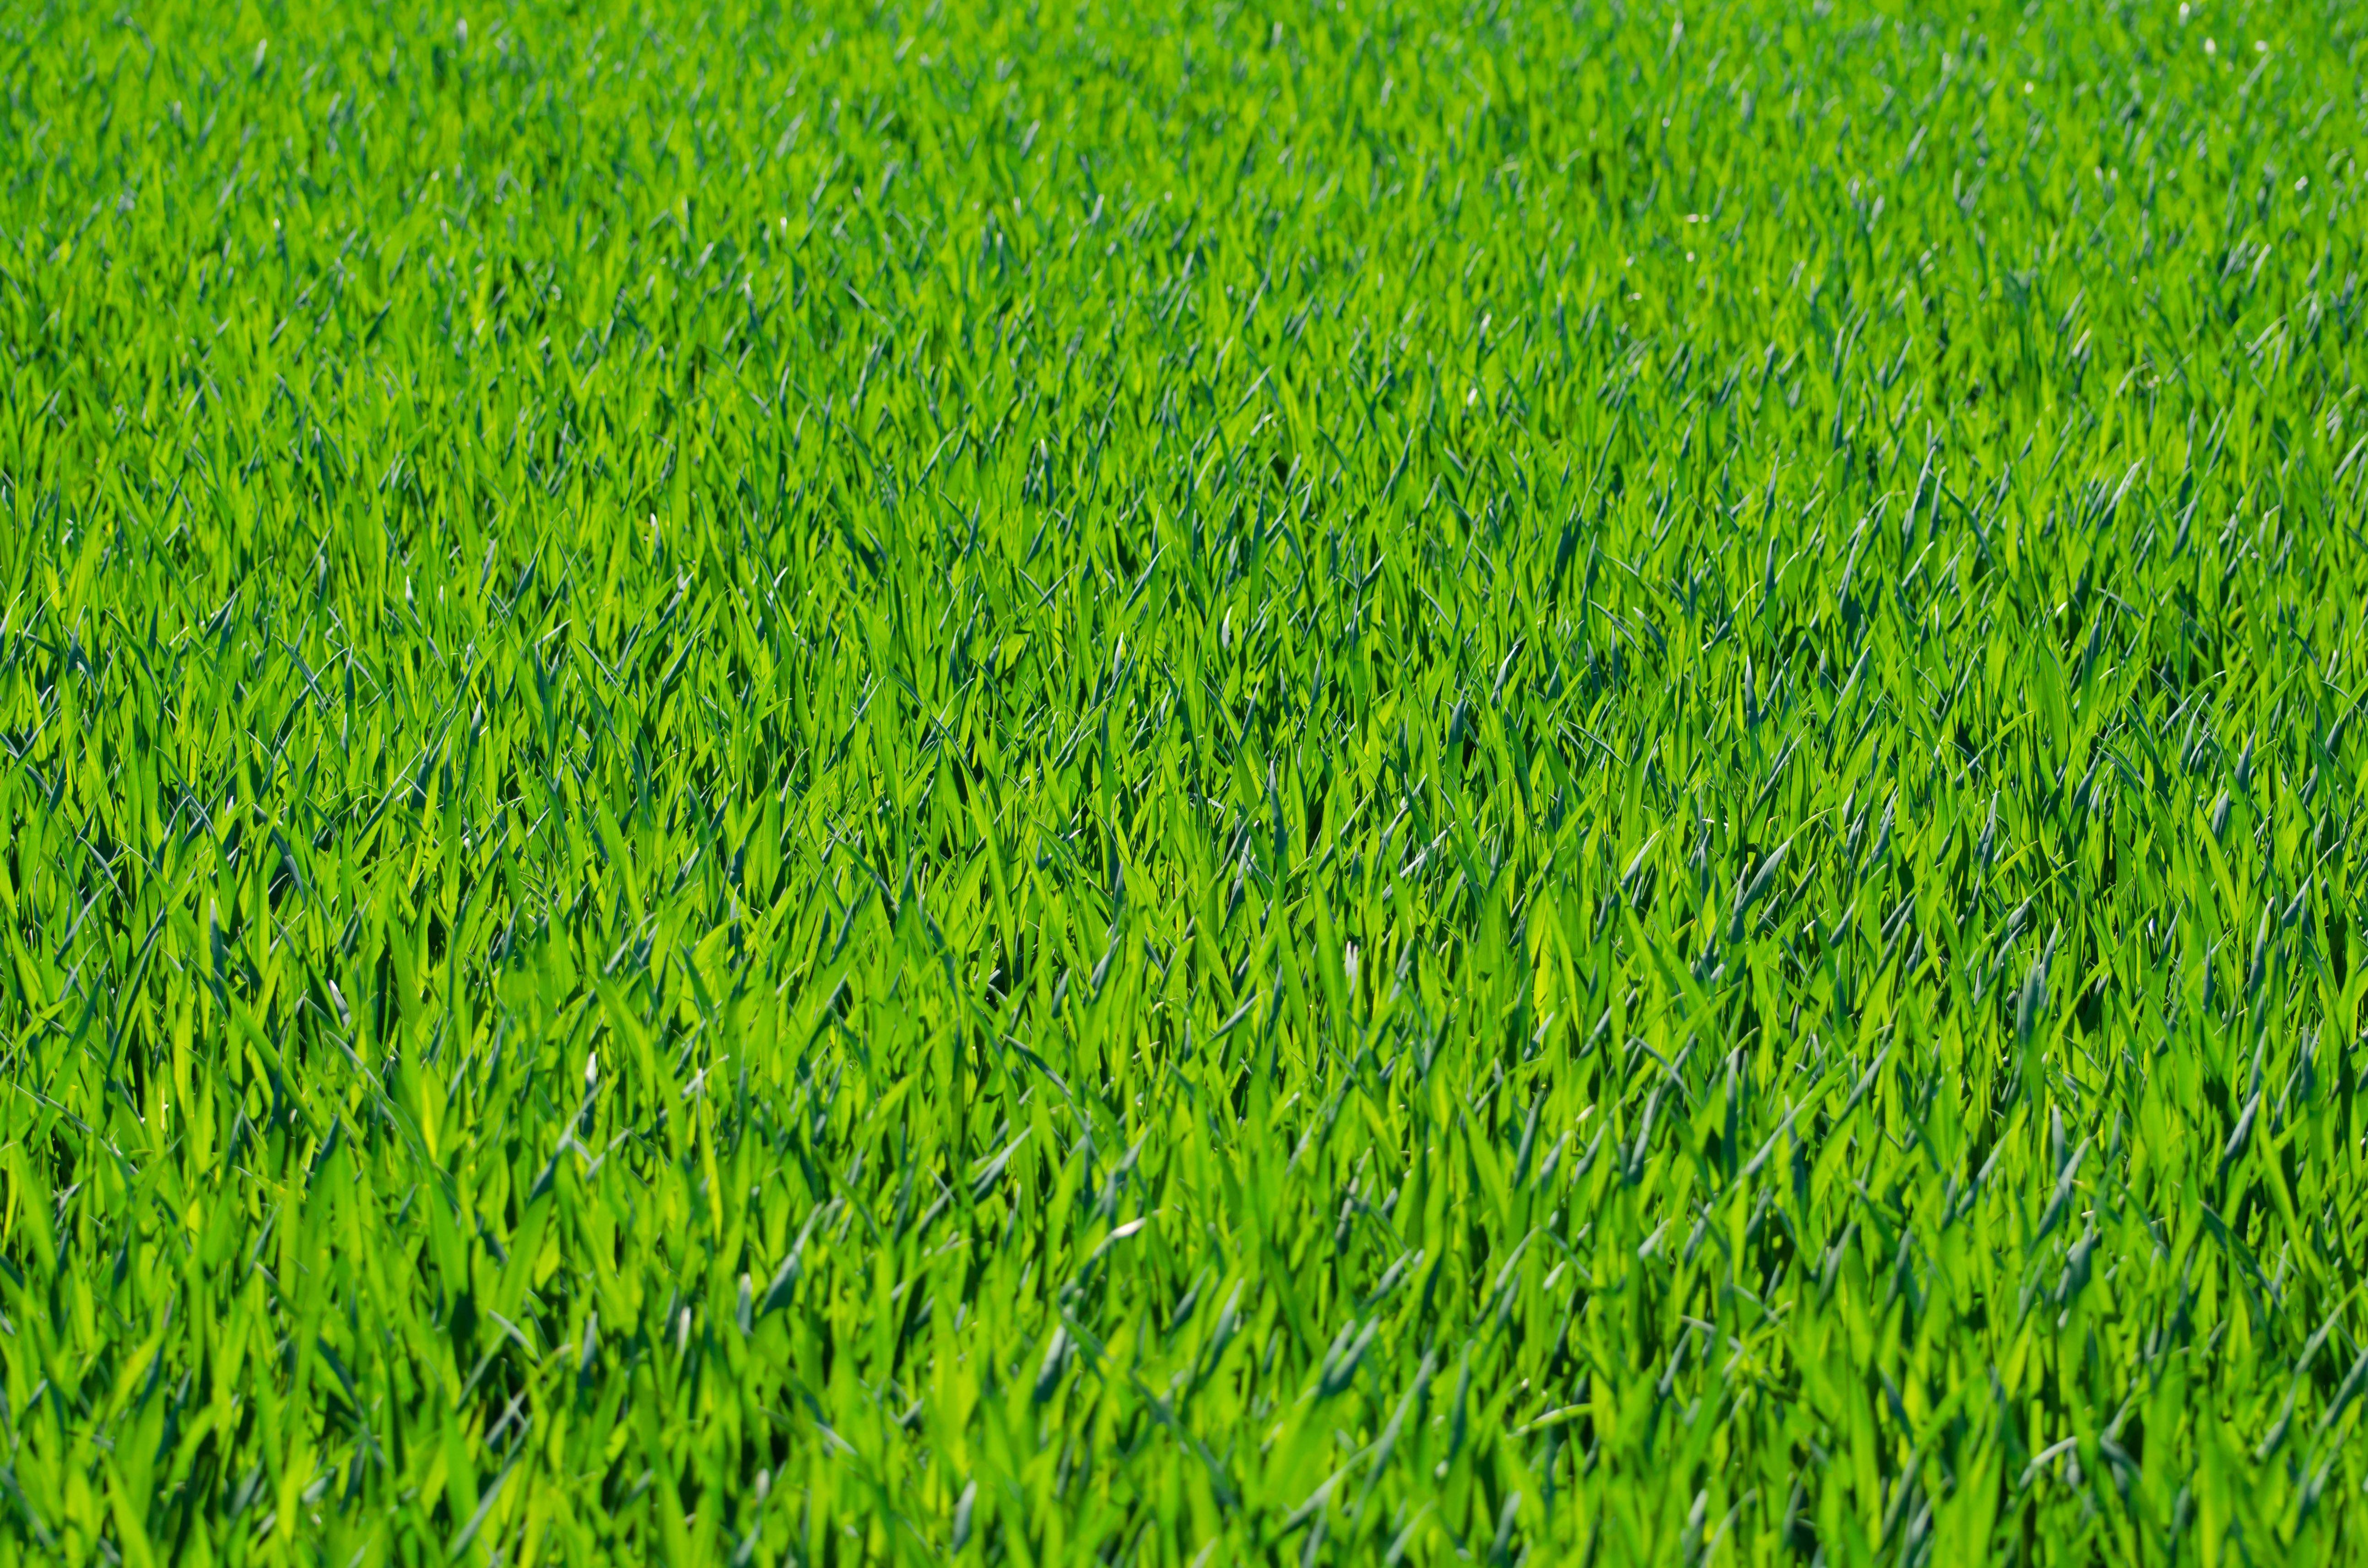 Seven Free Grass Textures or Lawn Background Image